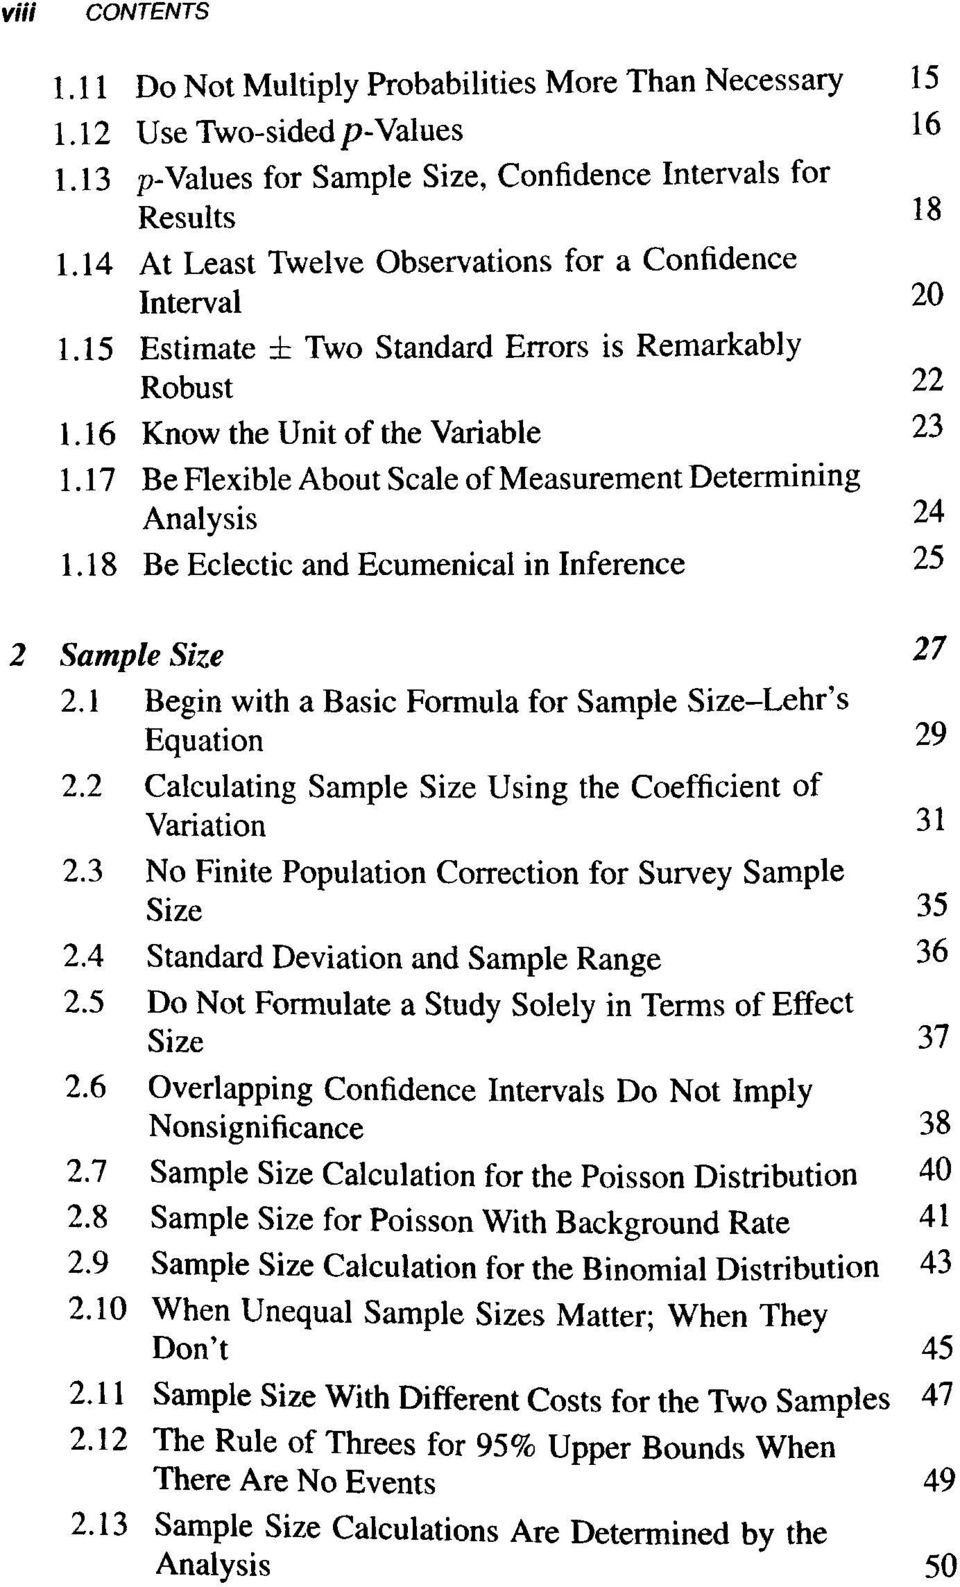 17 Be Flexible About Scale of Measurement Determining Analysis 24 1.18 Be Eclectic and Ecumenical in Inference 25 2 Sample Size 27 2.1 Begin with a Basic Formula for Sample Size-Lehr's Equation 29 2.